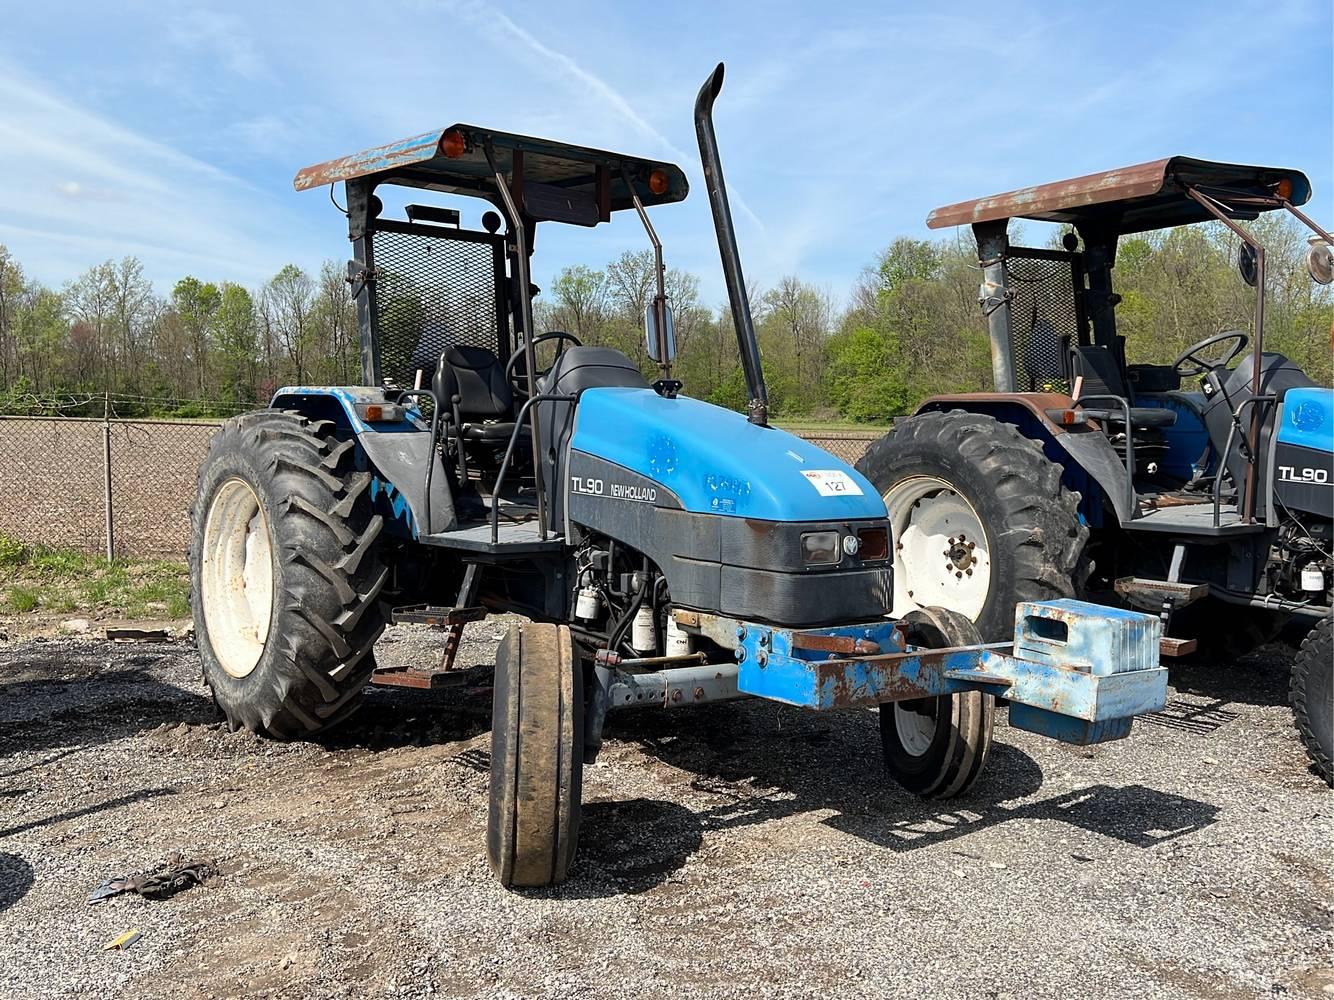 2000 New Holland TL 90 Ag Tractor